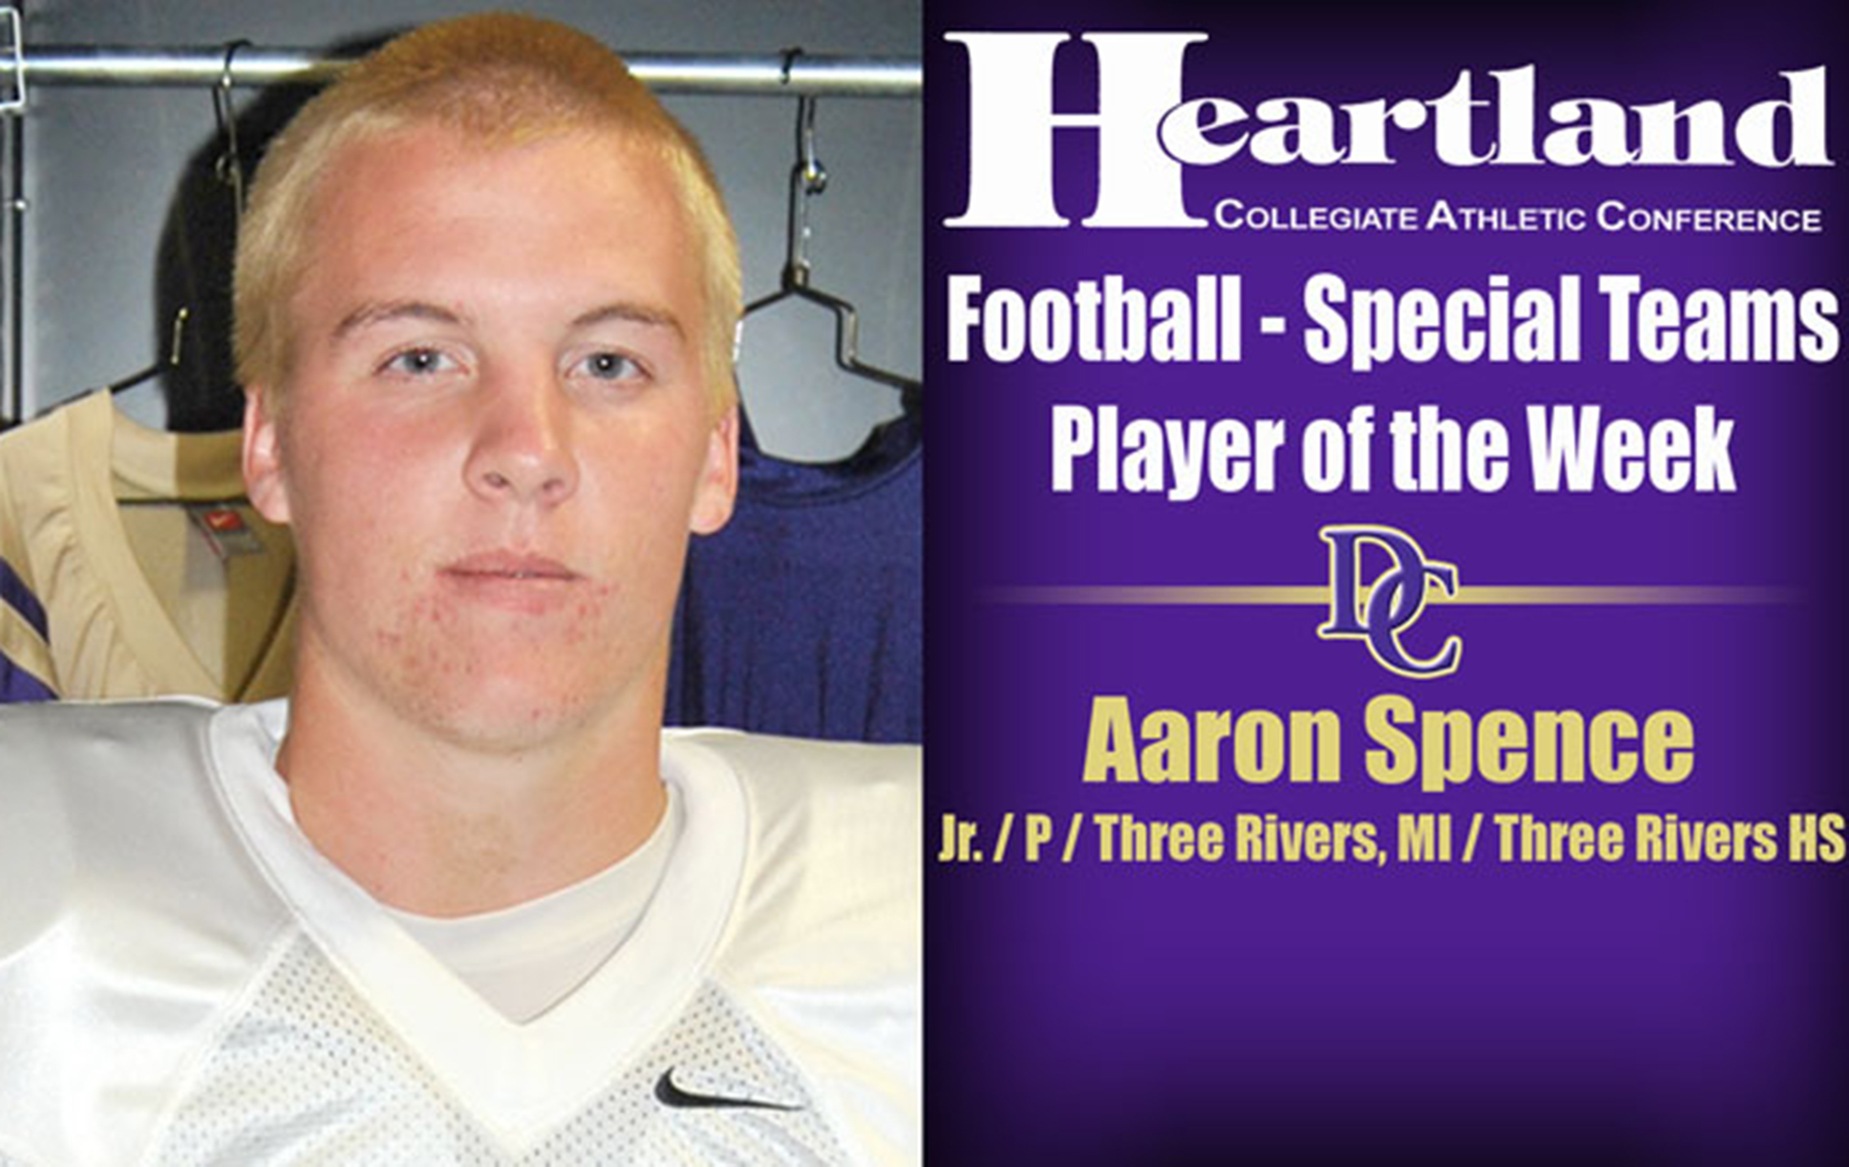 DC's Spence Picks Up Weekly Honor from HCAC